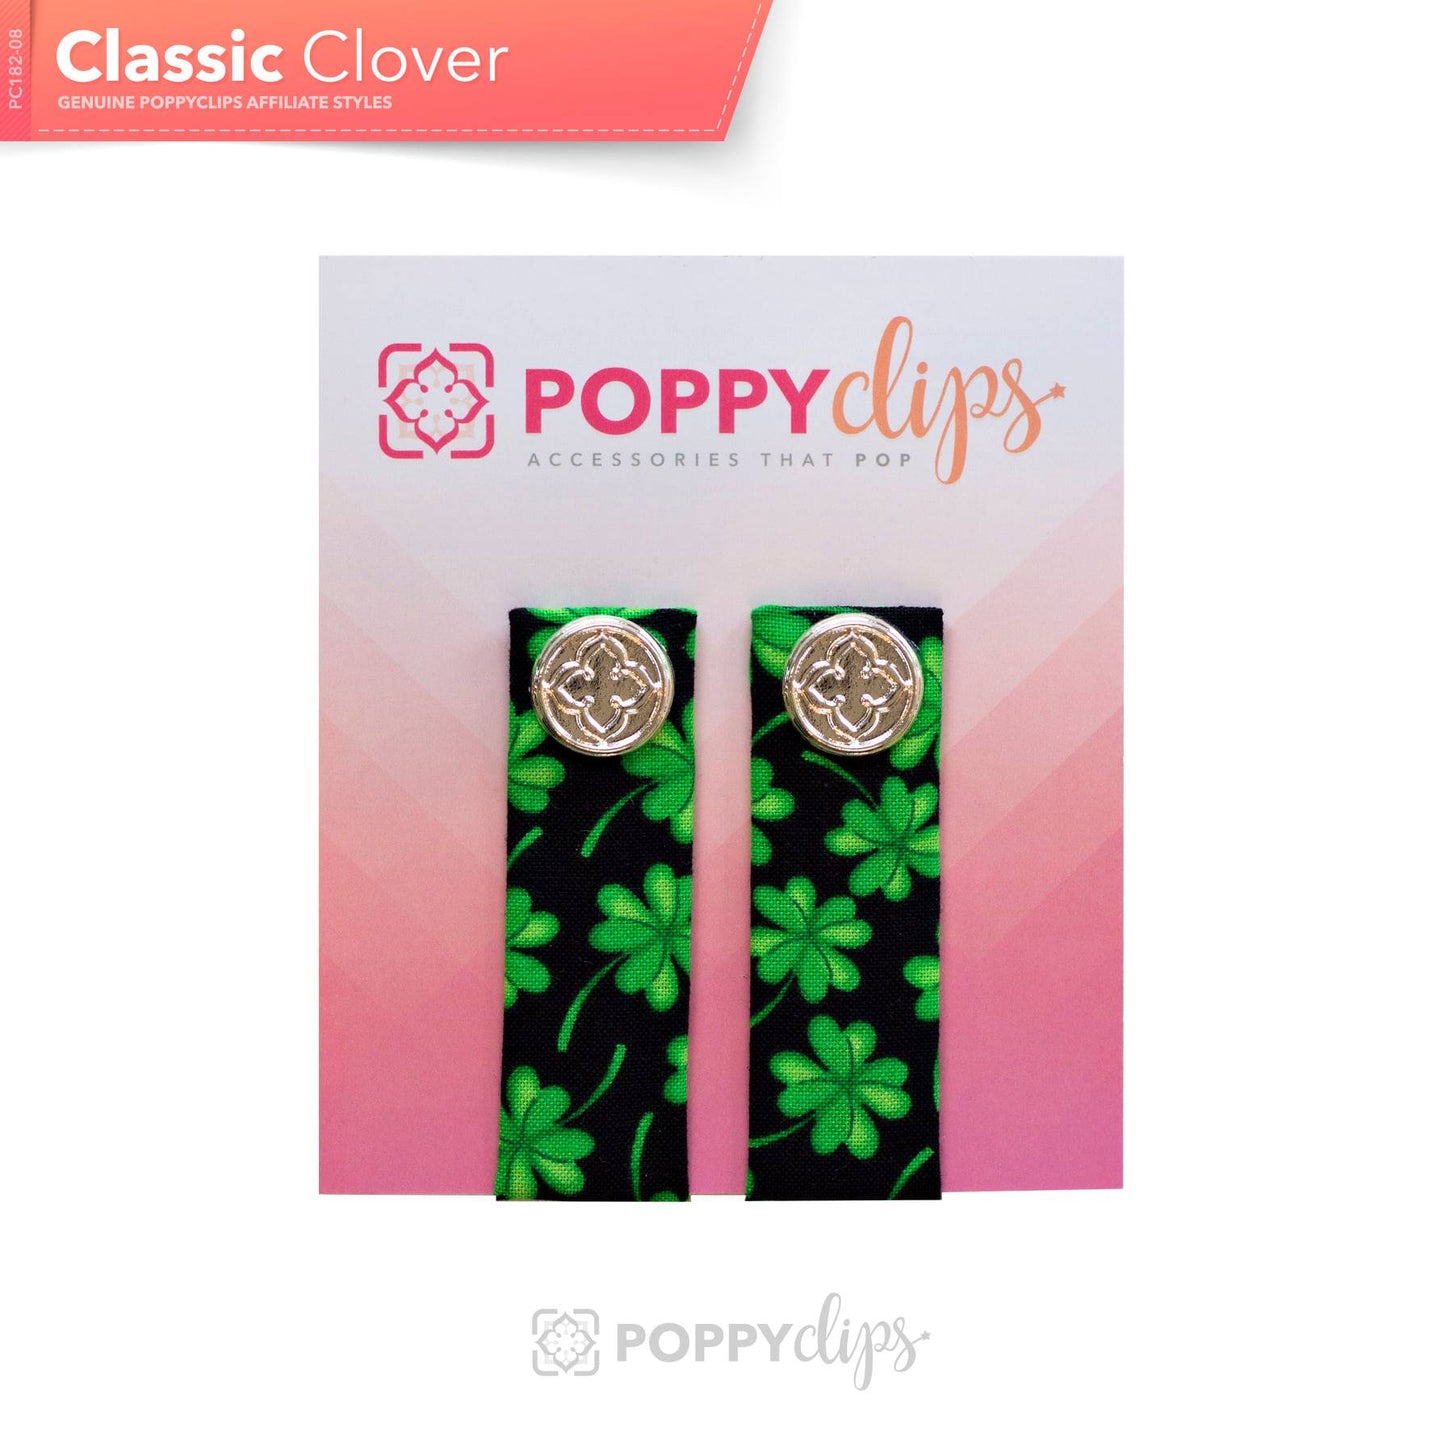 PoppyClips: Classic Clover - black and green